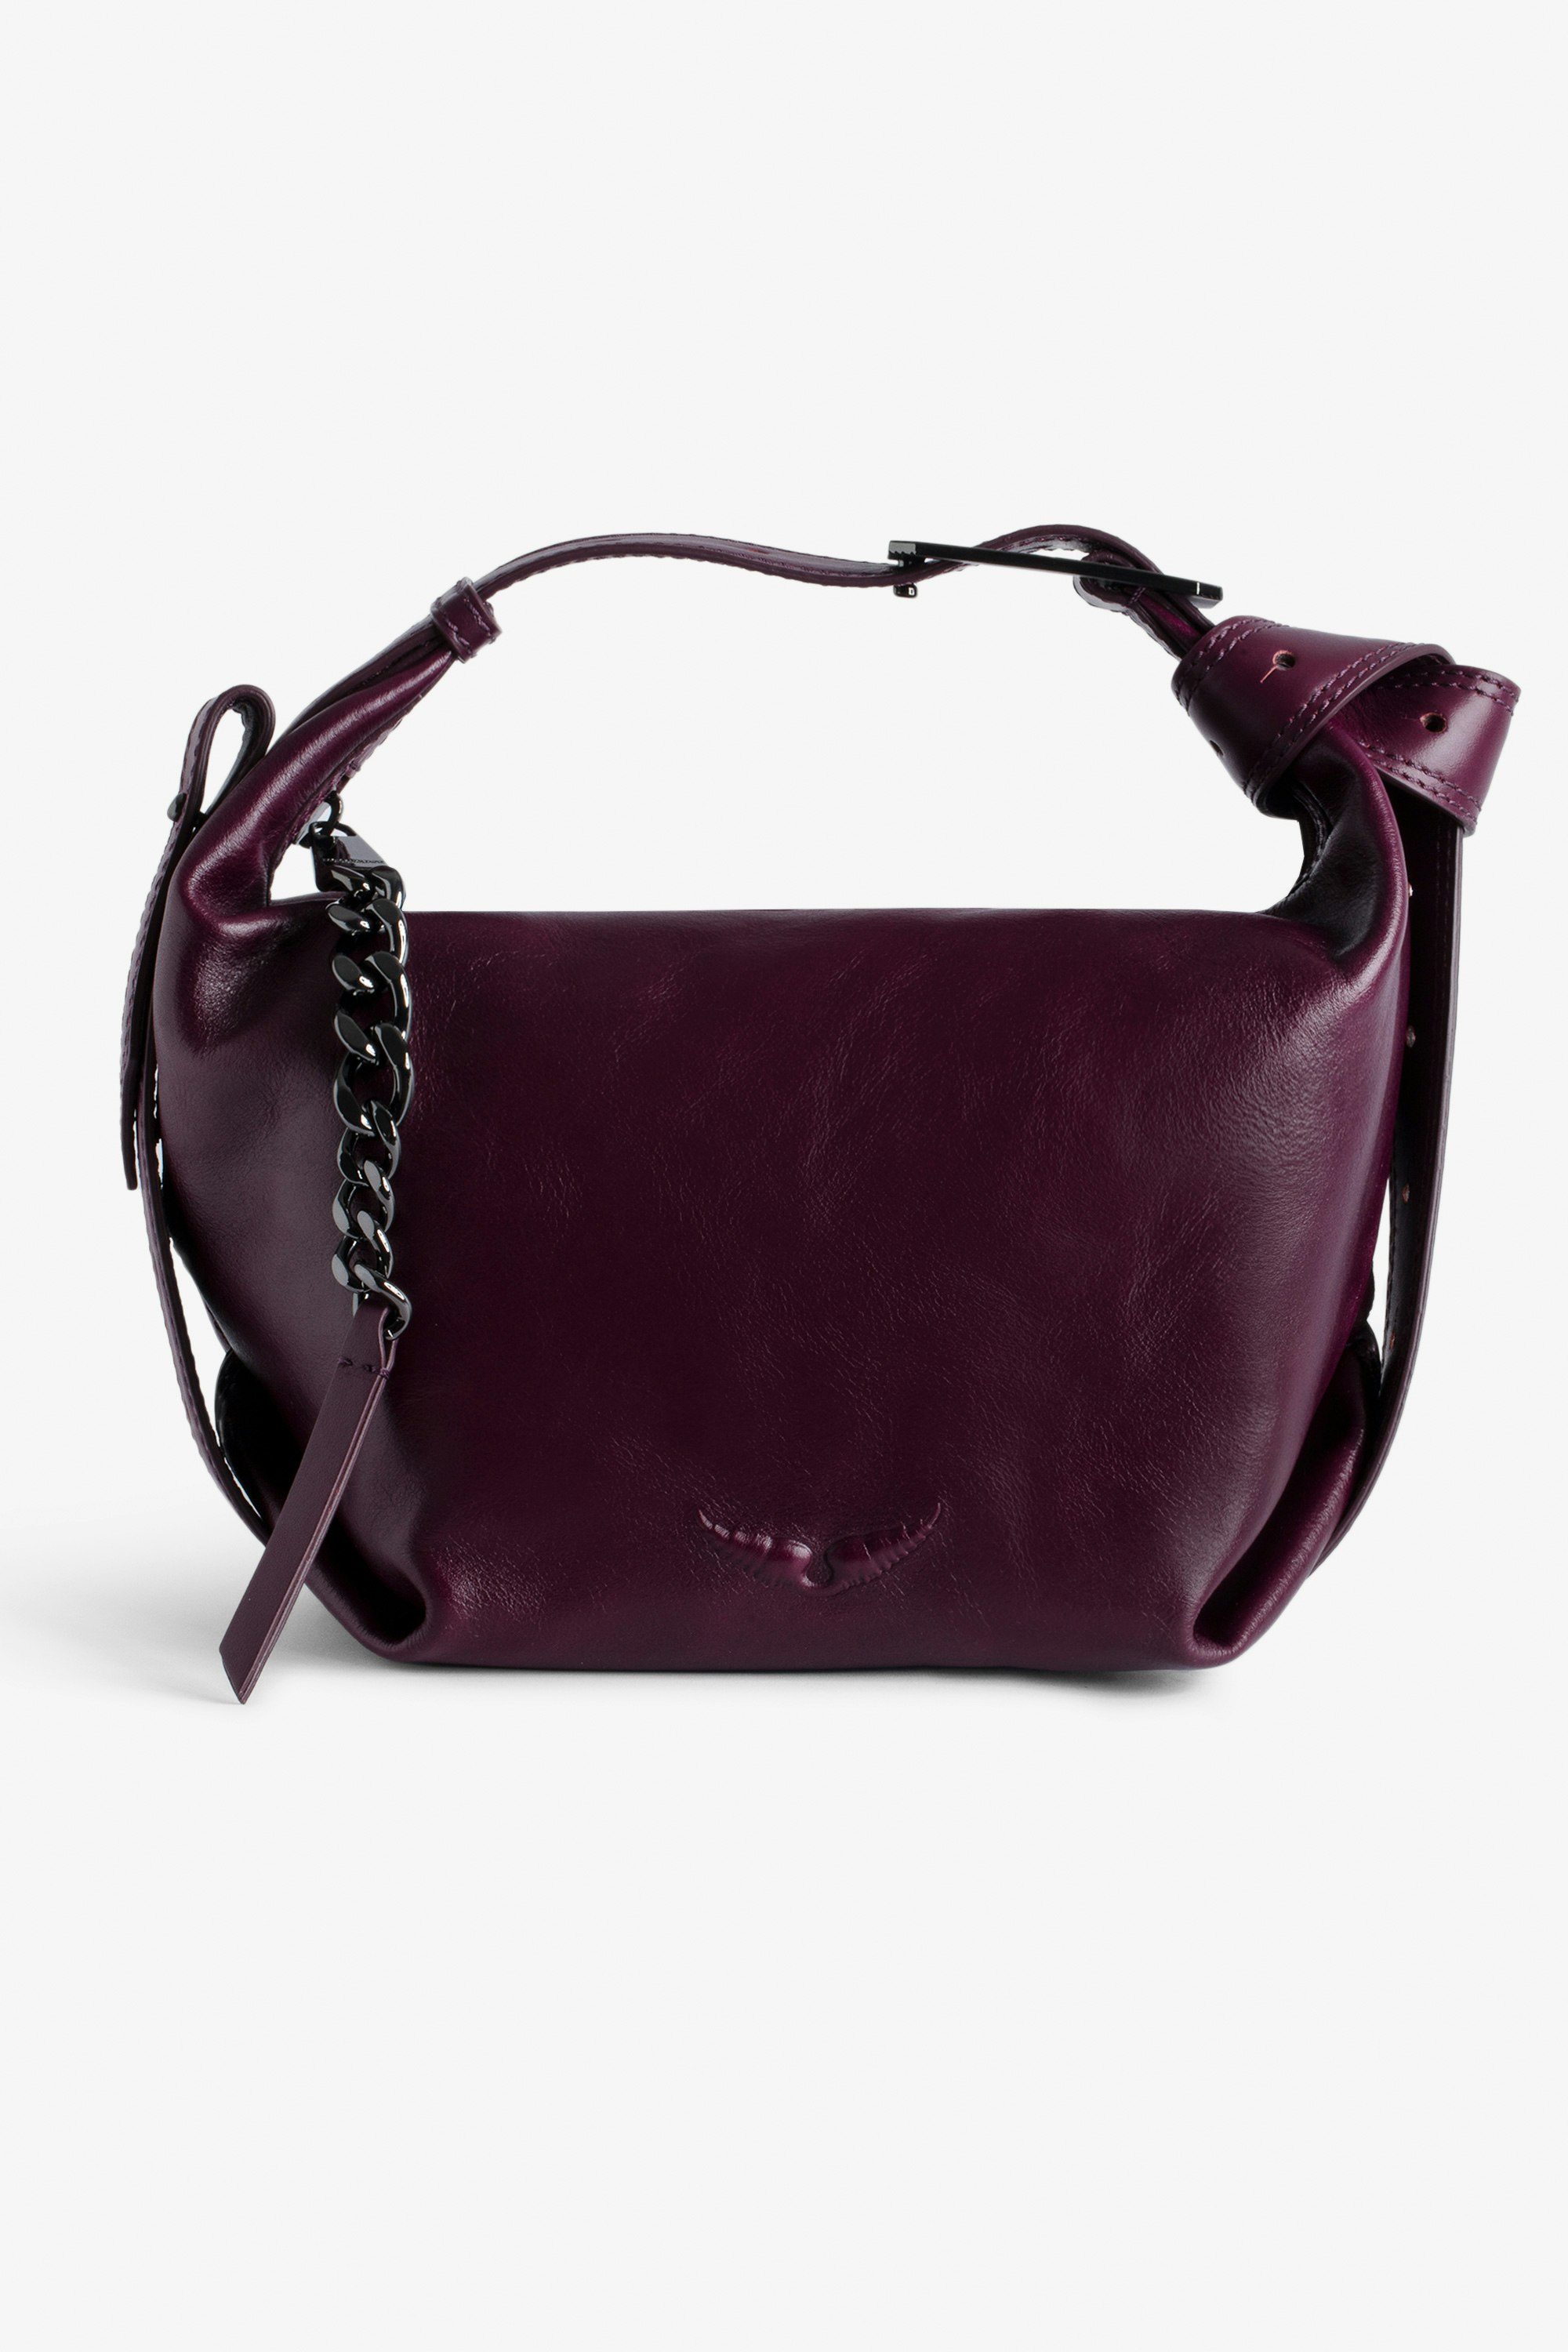 Le Cecilia バッグ Woman’s burgundy vegetable-tanned leather bag with shoulder strap and metal C buckle